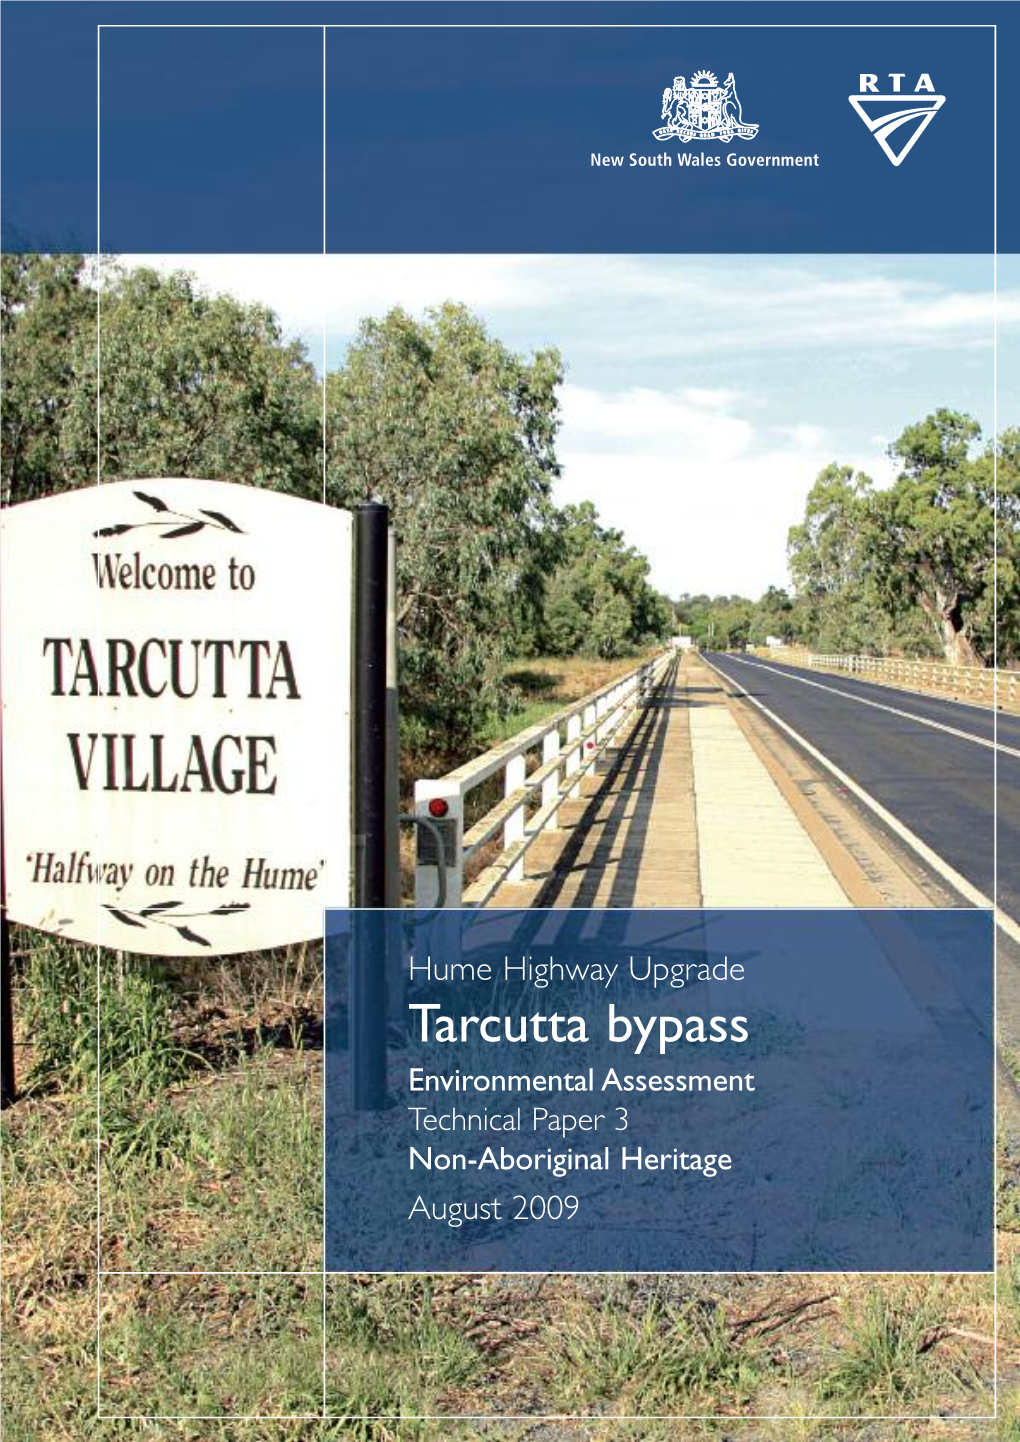 Hume Highway Upgrade Tarcutta Bypass Environmental Assessment Technical Paper 3 Non-Aboriginal Heritage August 2009